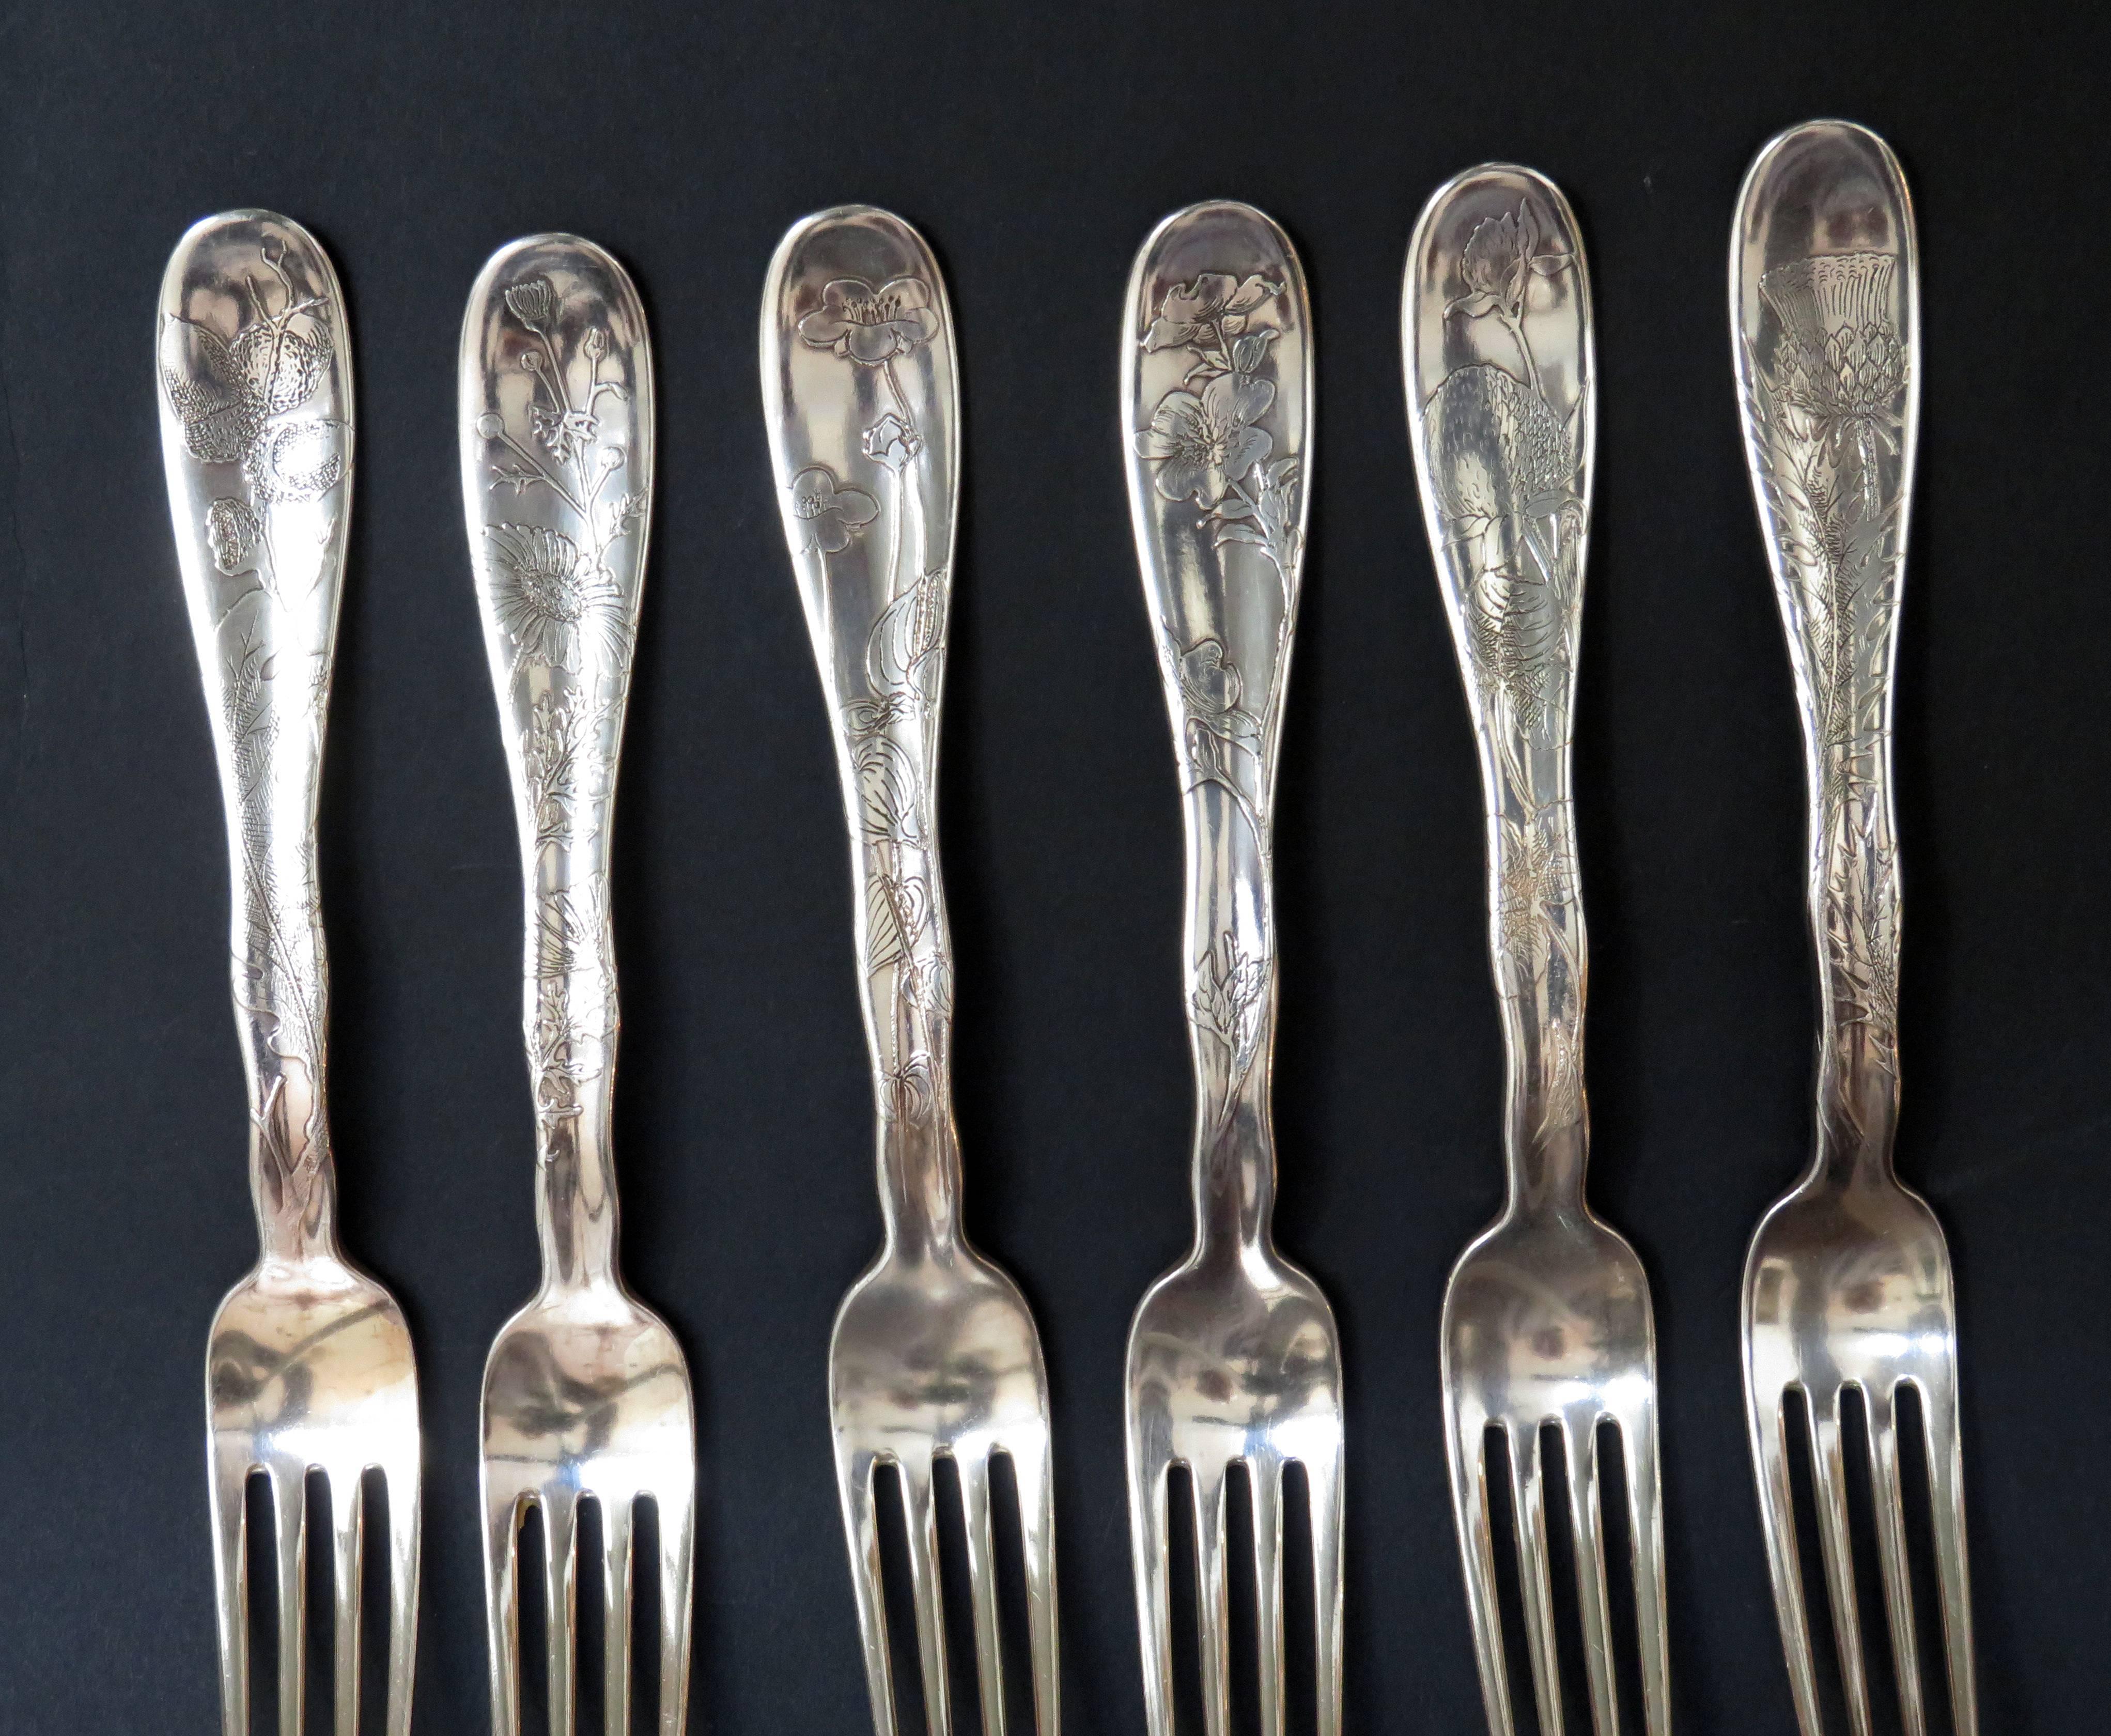 A set of 12 Tiffany & Company lap over edge acid etched dinner forks each etched with plants and flowers. 6 forks have a monogram of 